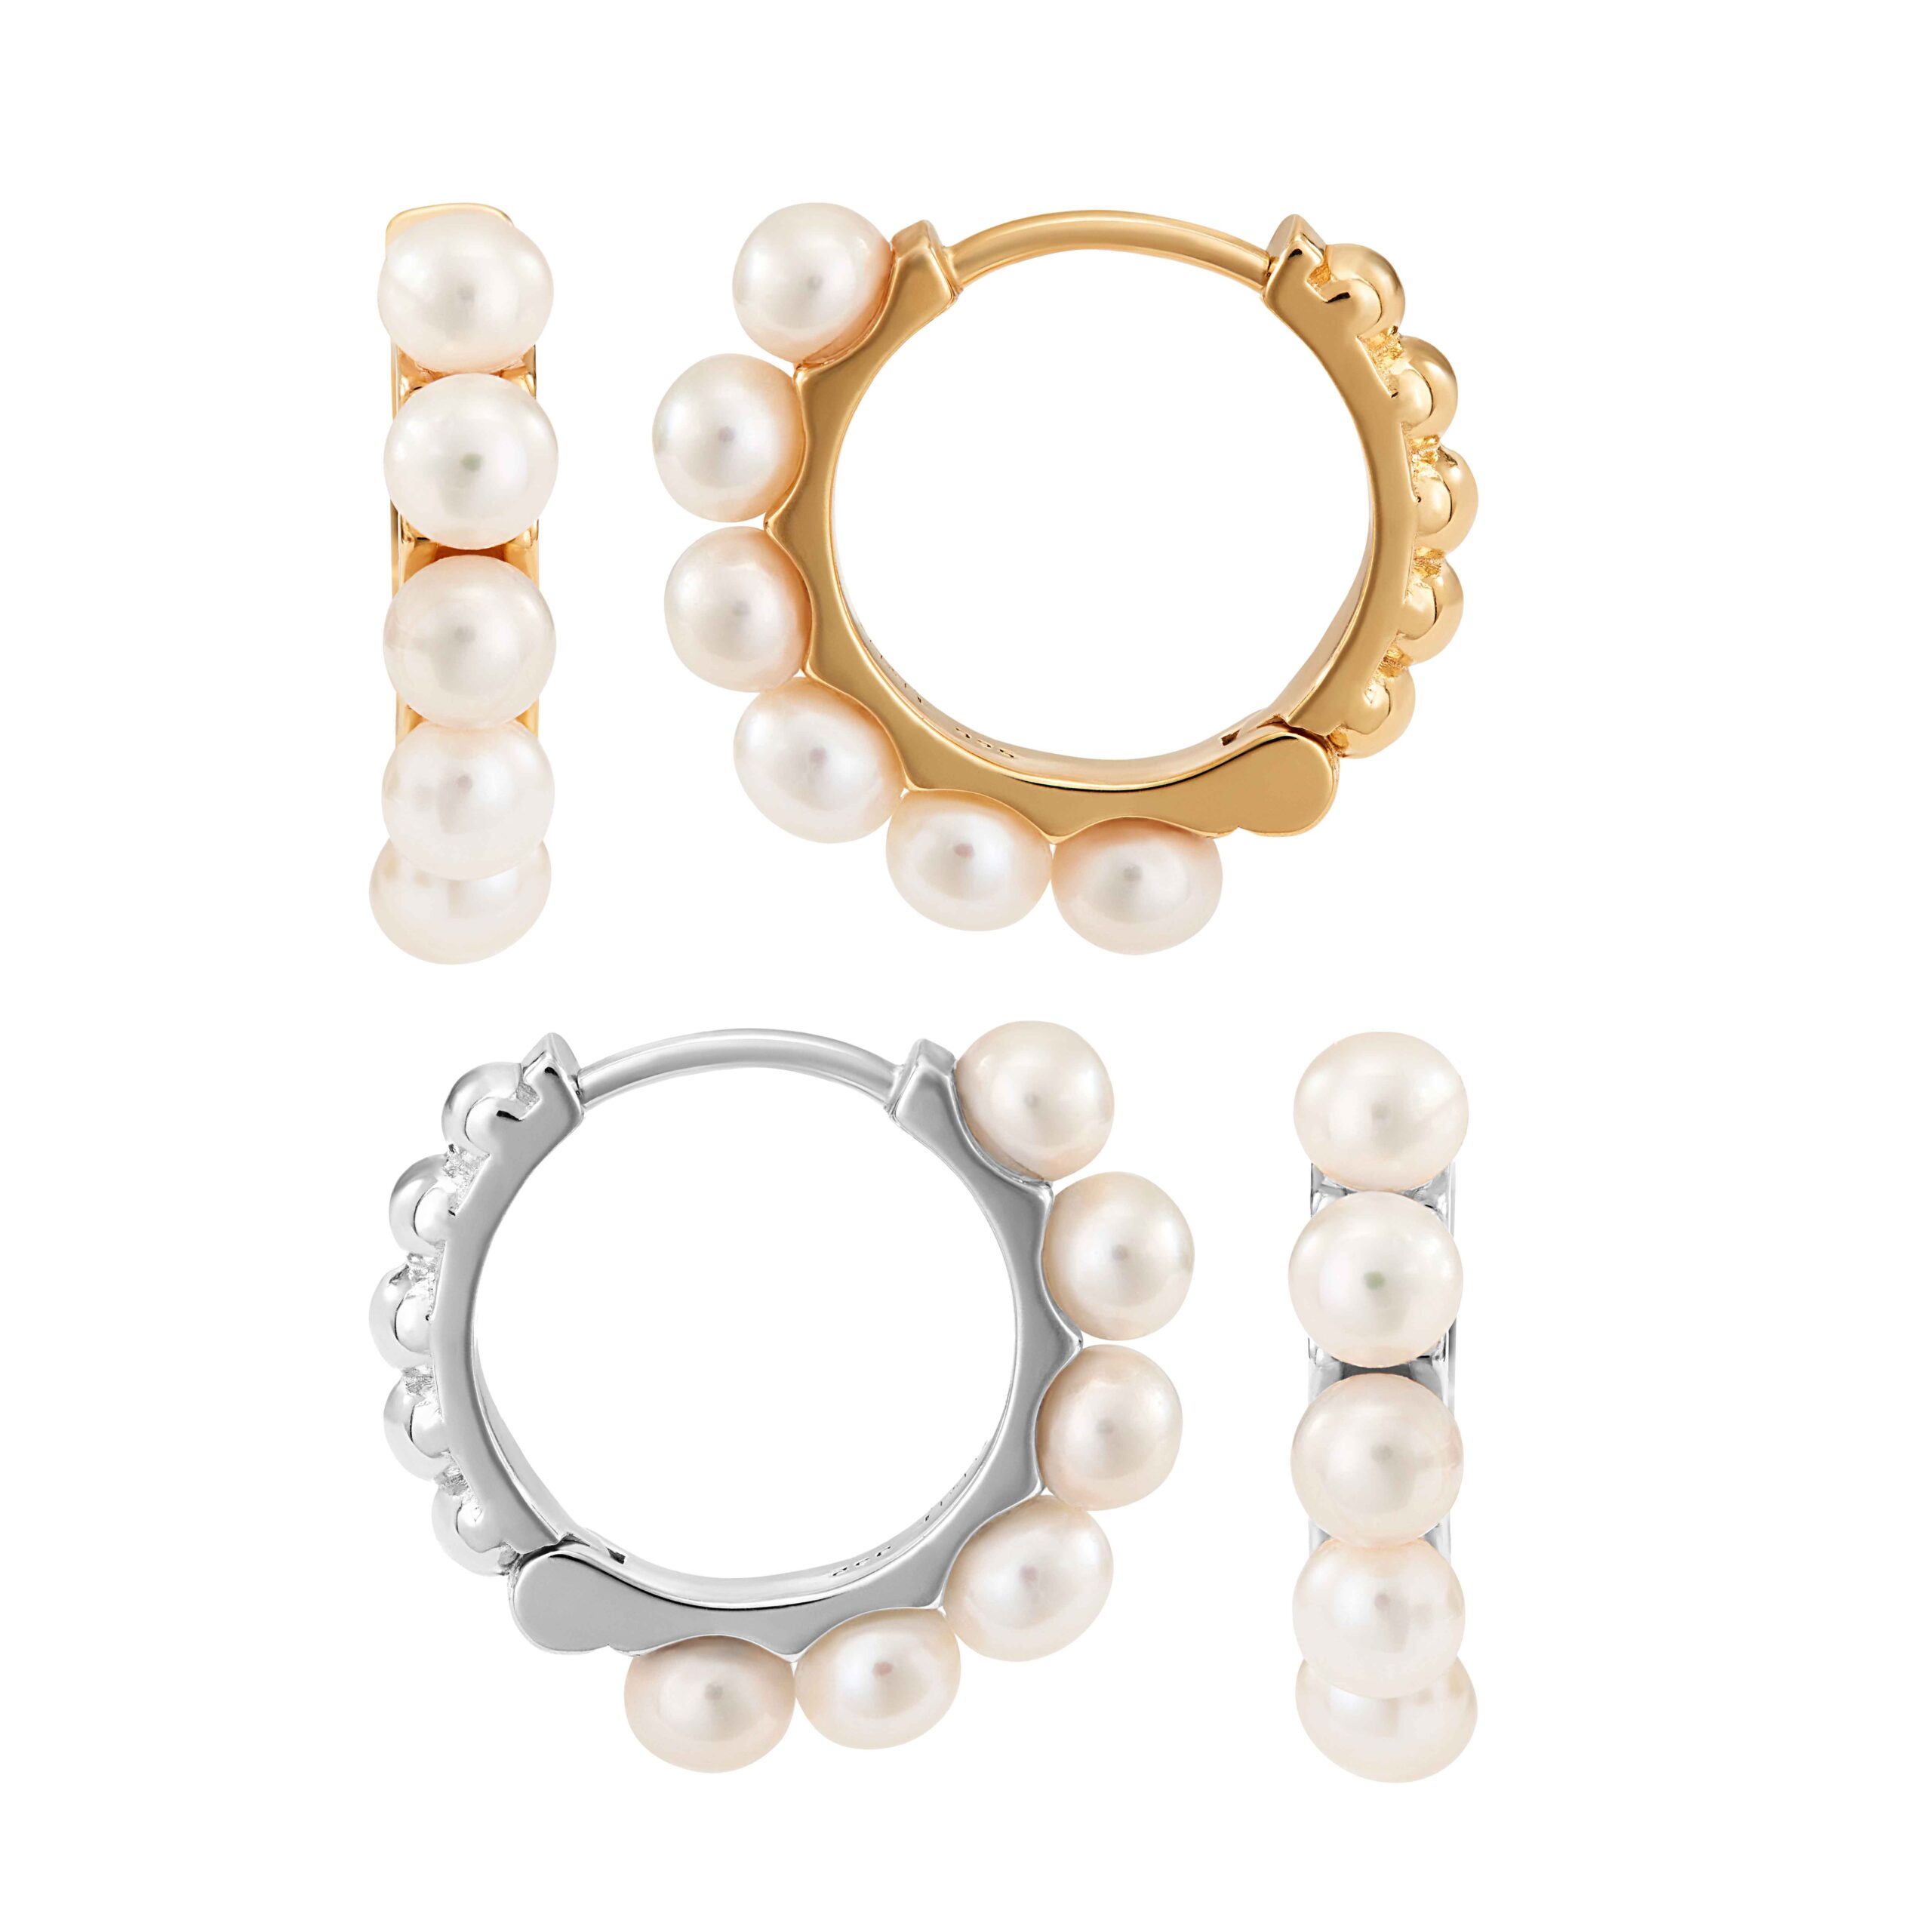 Silver or vermeil pearl hoops on Sally Thorntons jewellery blog from AA Thornton Kettering Northampton 